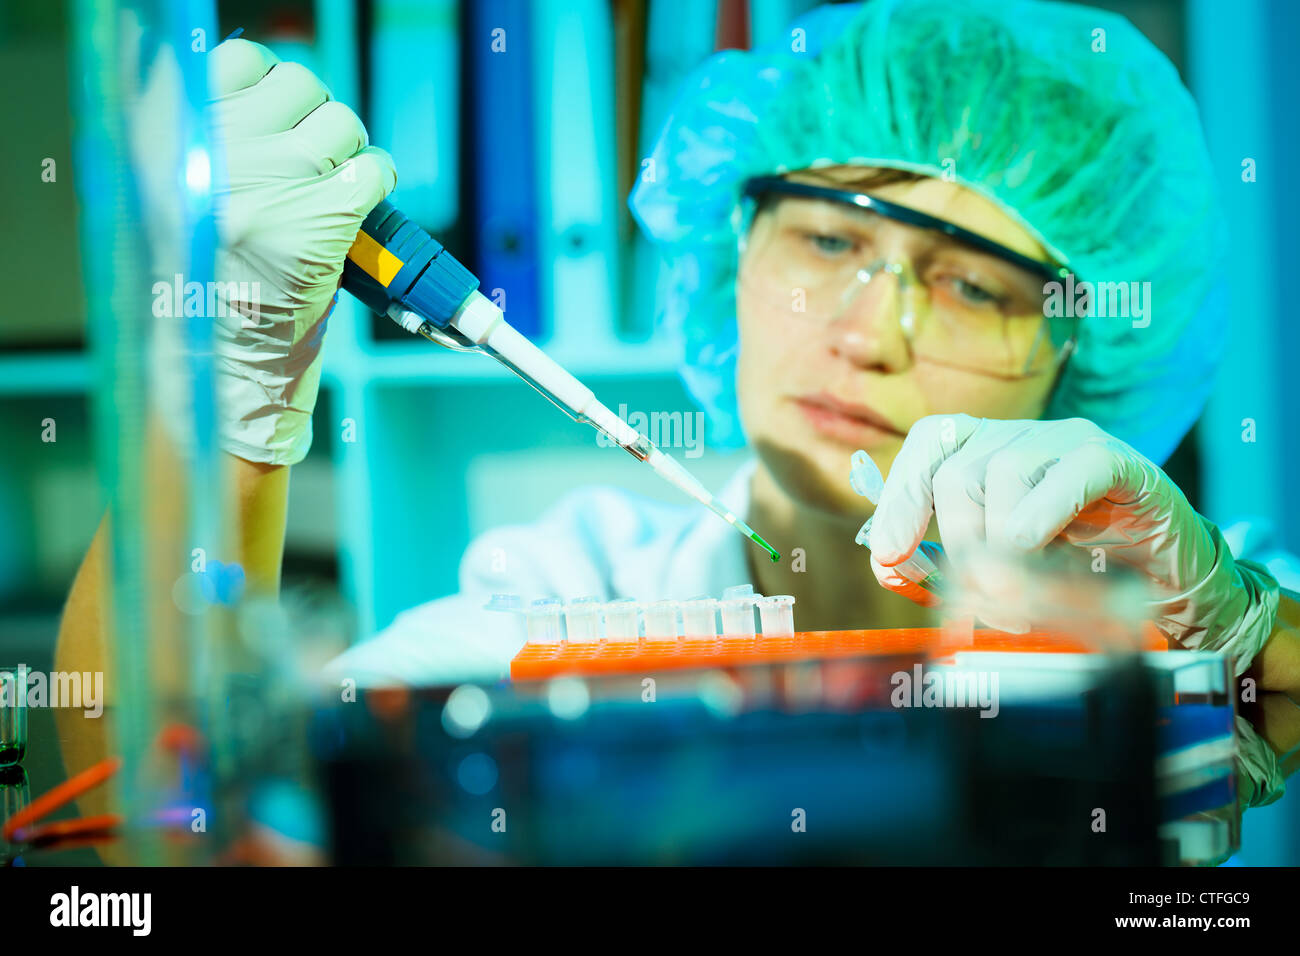 Researcher uses a pipette to infect a culture of human cells with a virus. Stock Photo